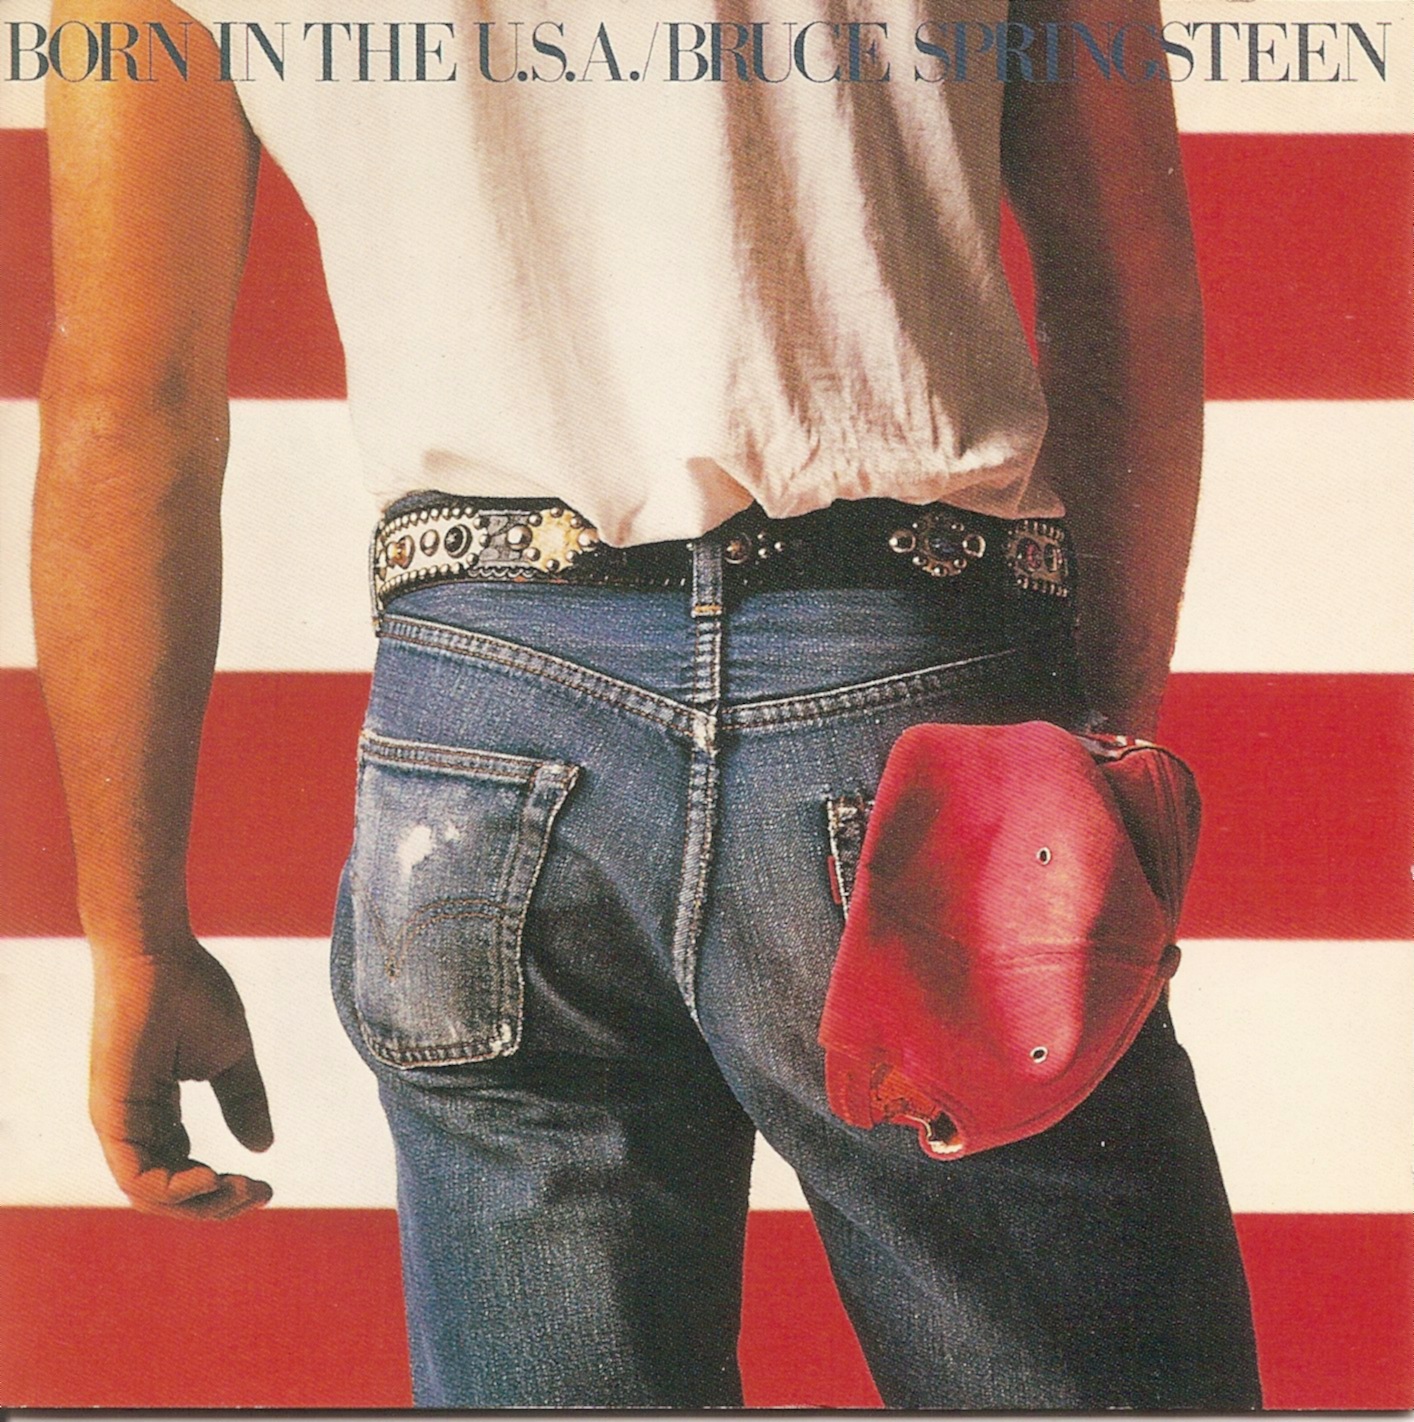 The First Pressing CD Collection: Bruce Springsteen - Born ...